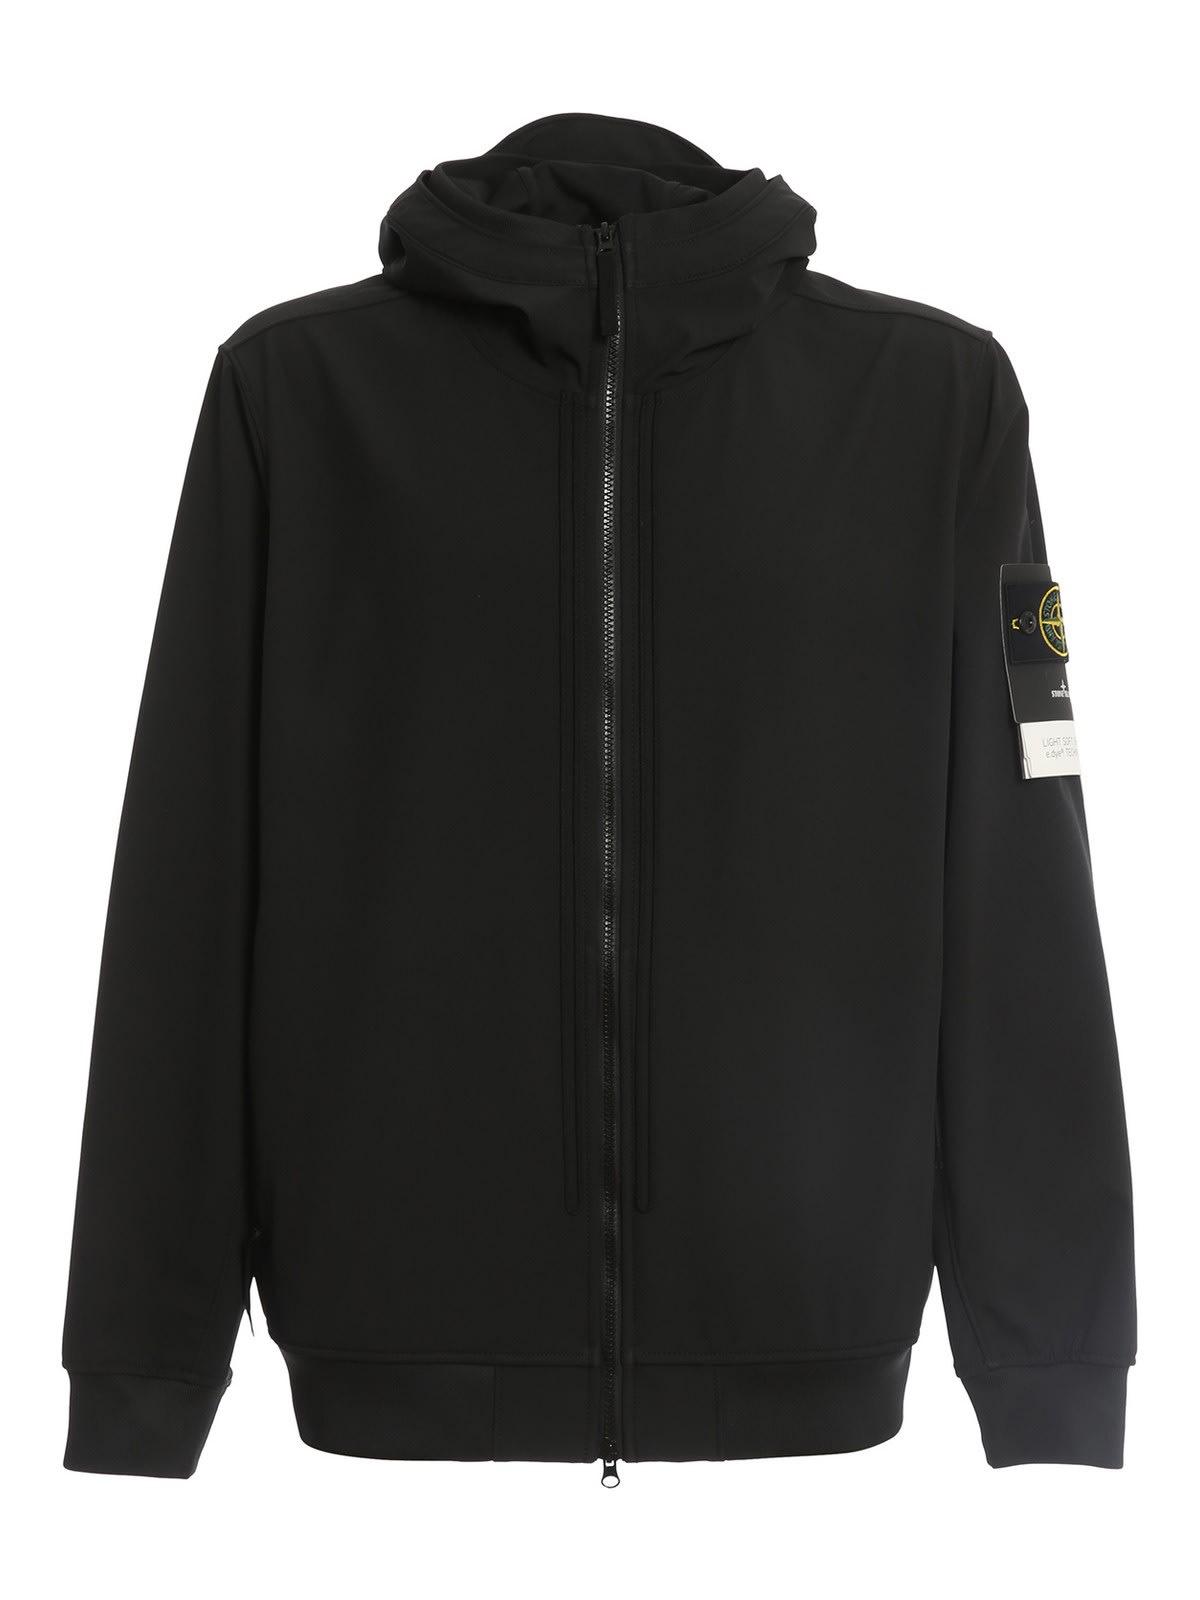 Stone Island Soft Shell Jacket in Black for Men | Lyst